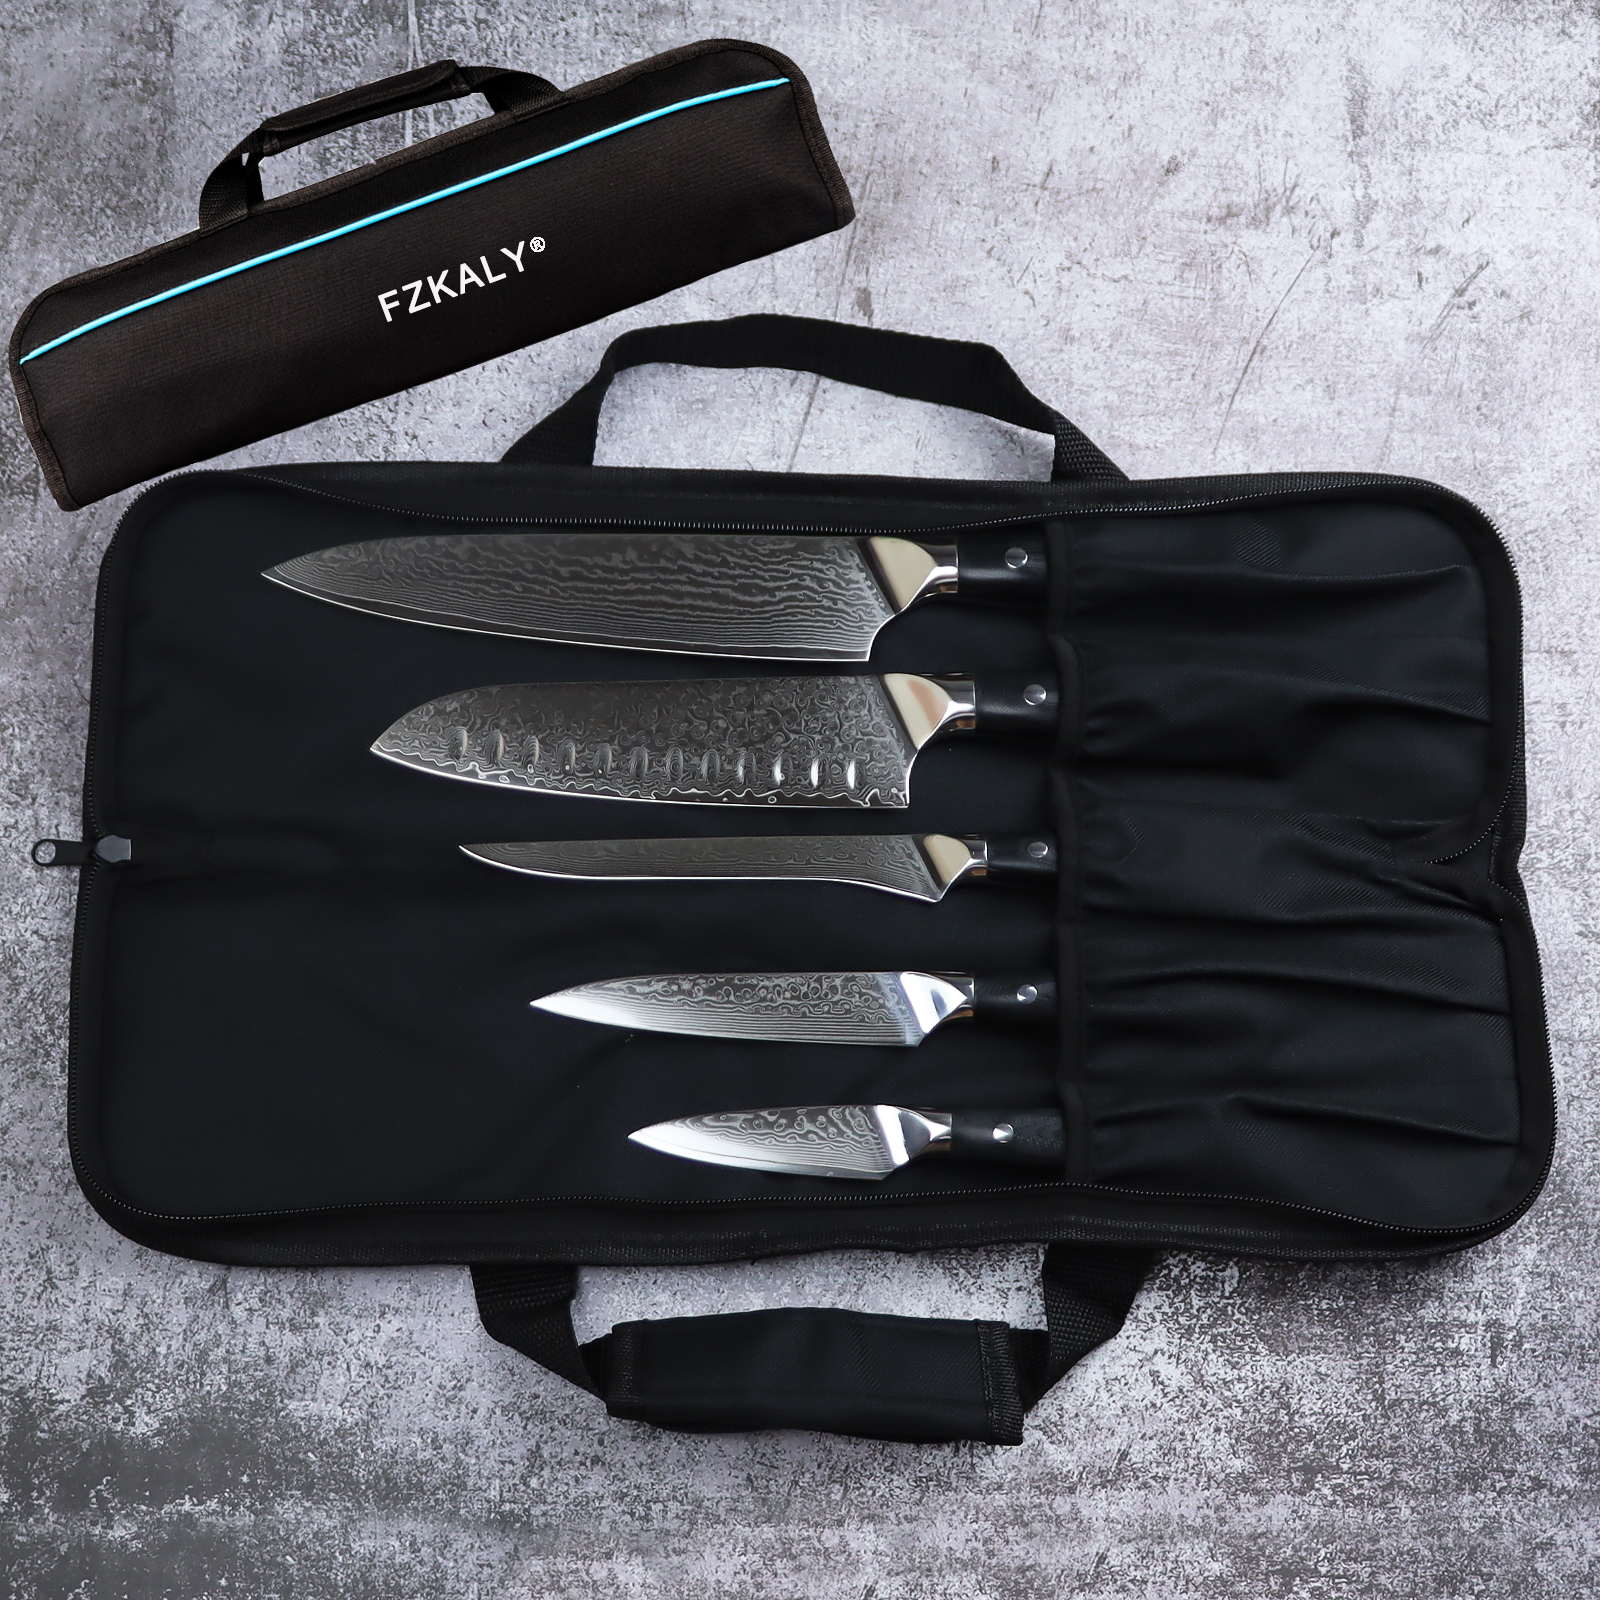 Fzkaly Chef Knife Set With Carrying Case